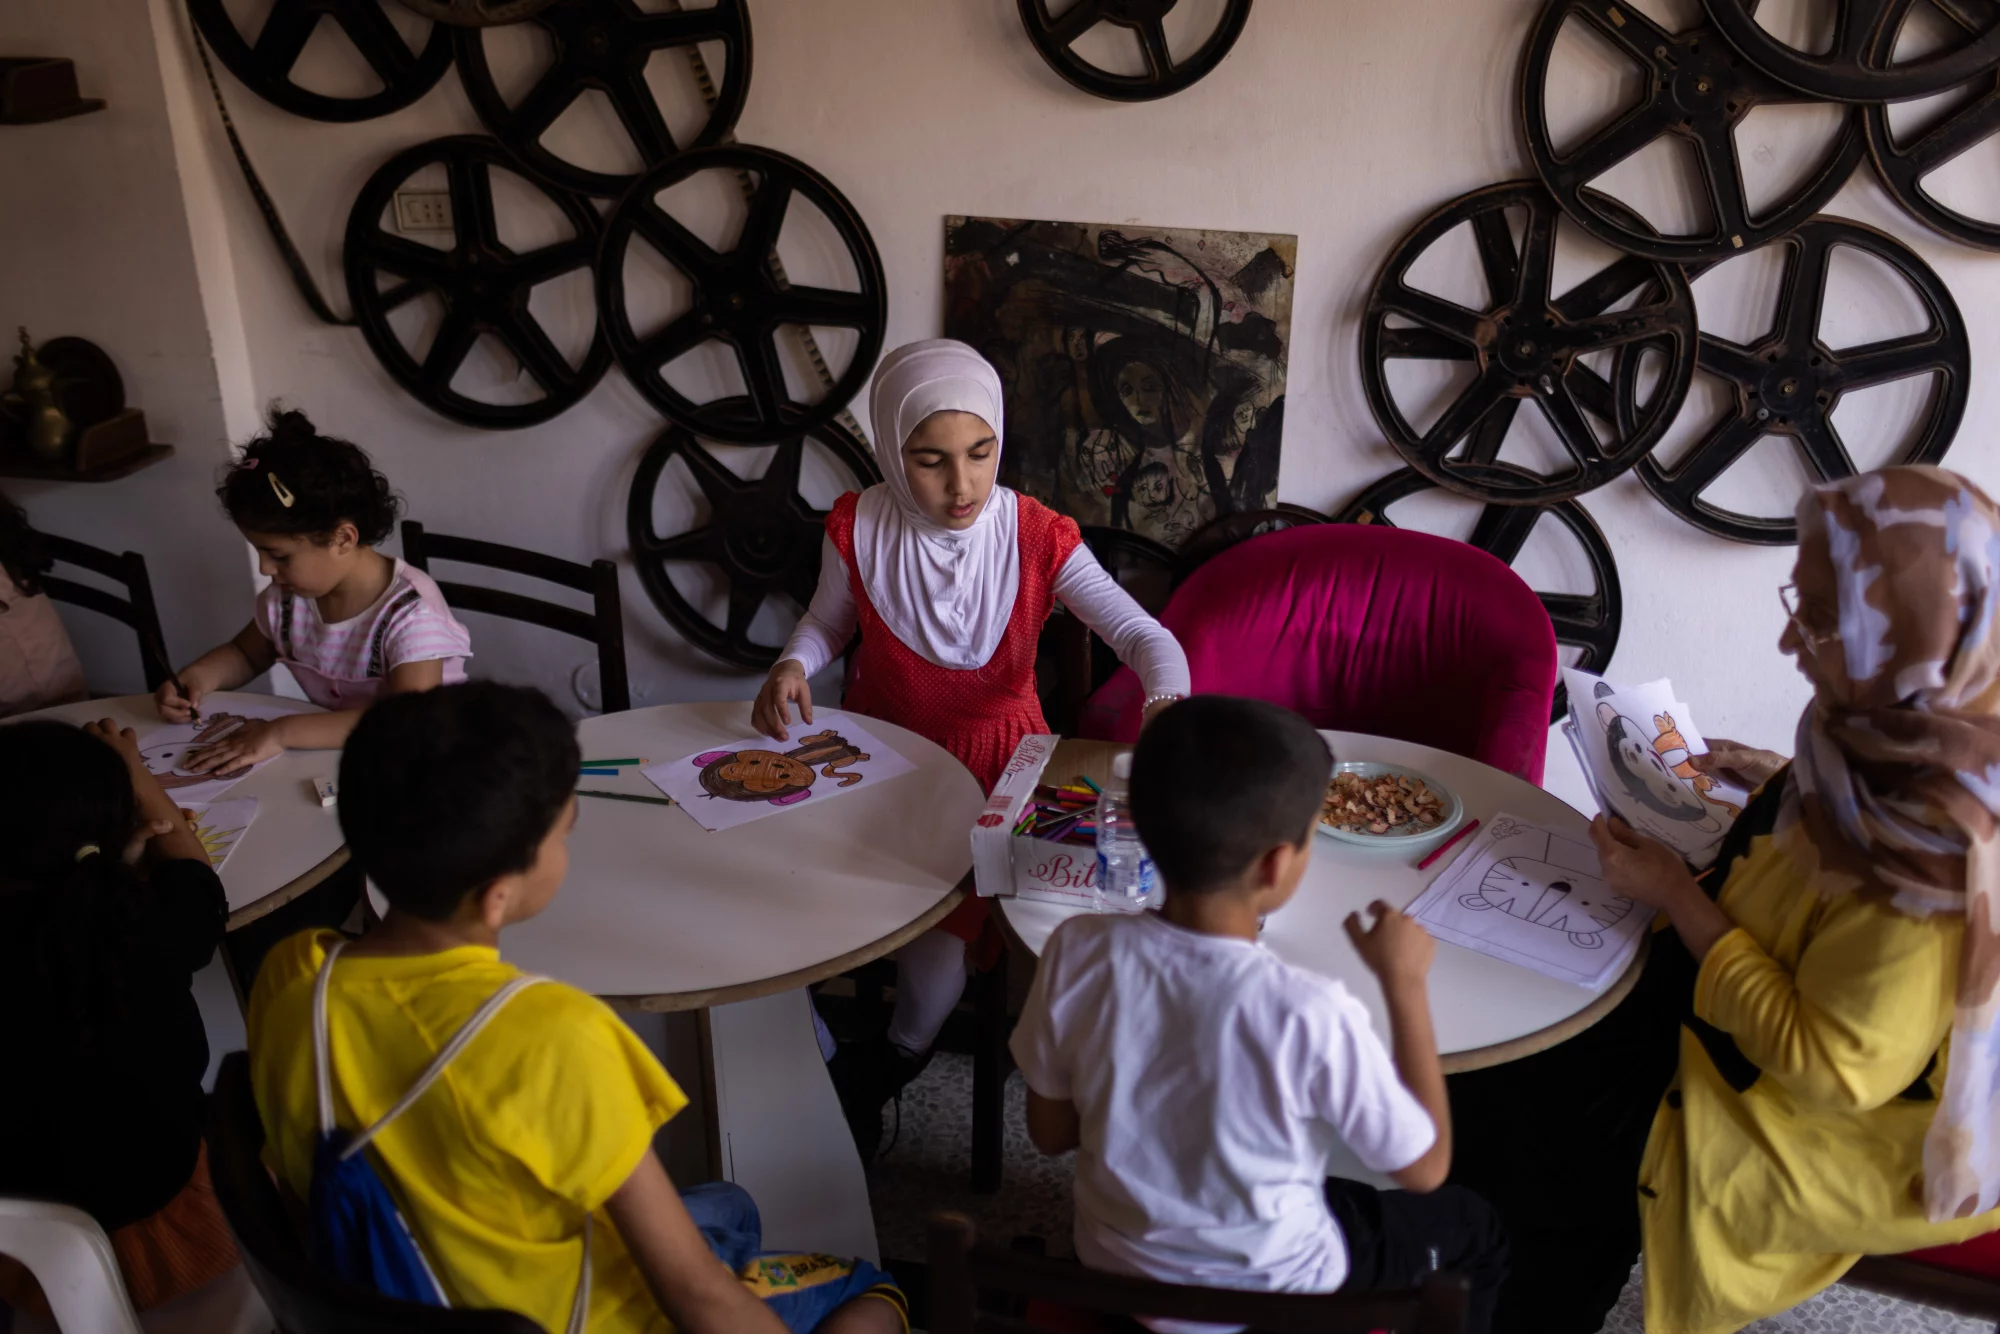 Art is a comfort for these displaced Lebanese kids